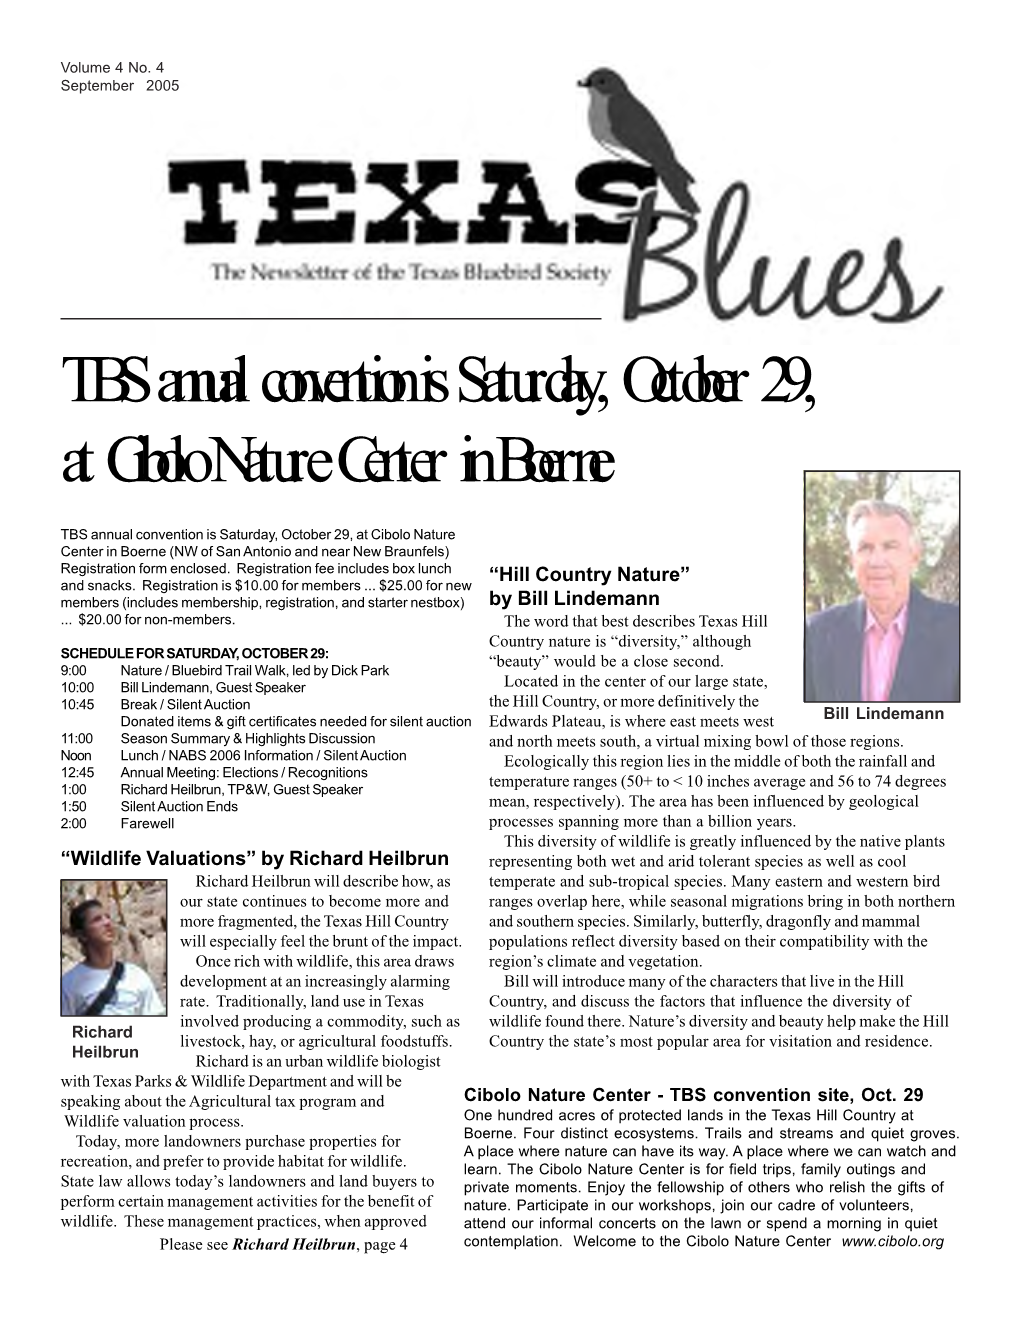 TBS Annual Convention Is Saturday, October 29, at Cibolo Nature Center in Boerne